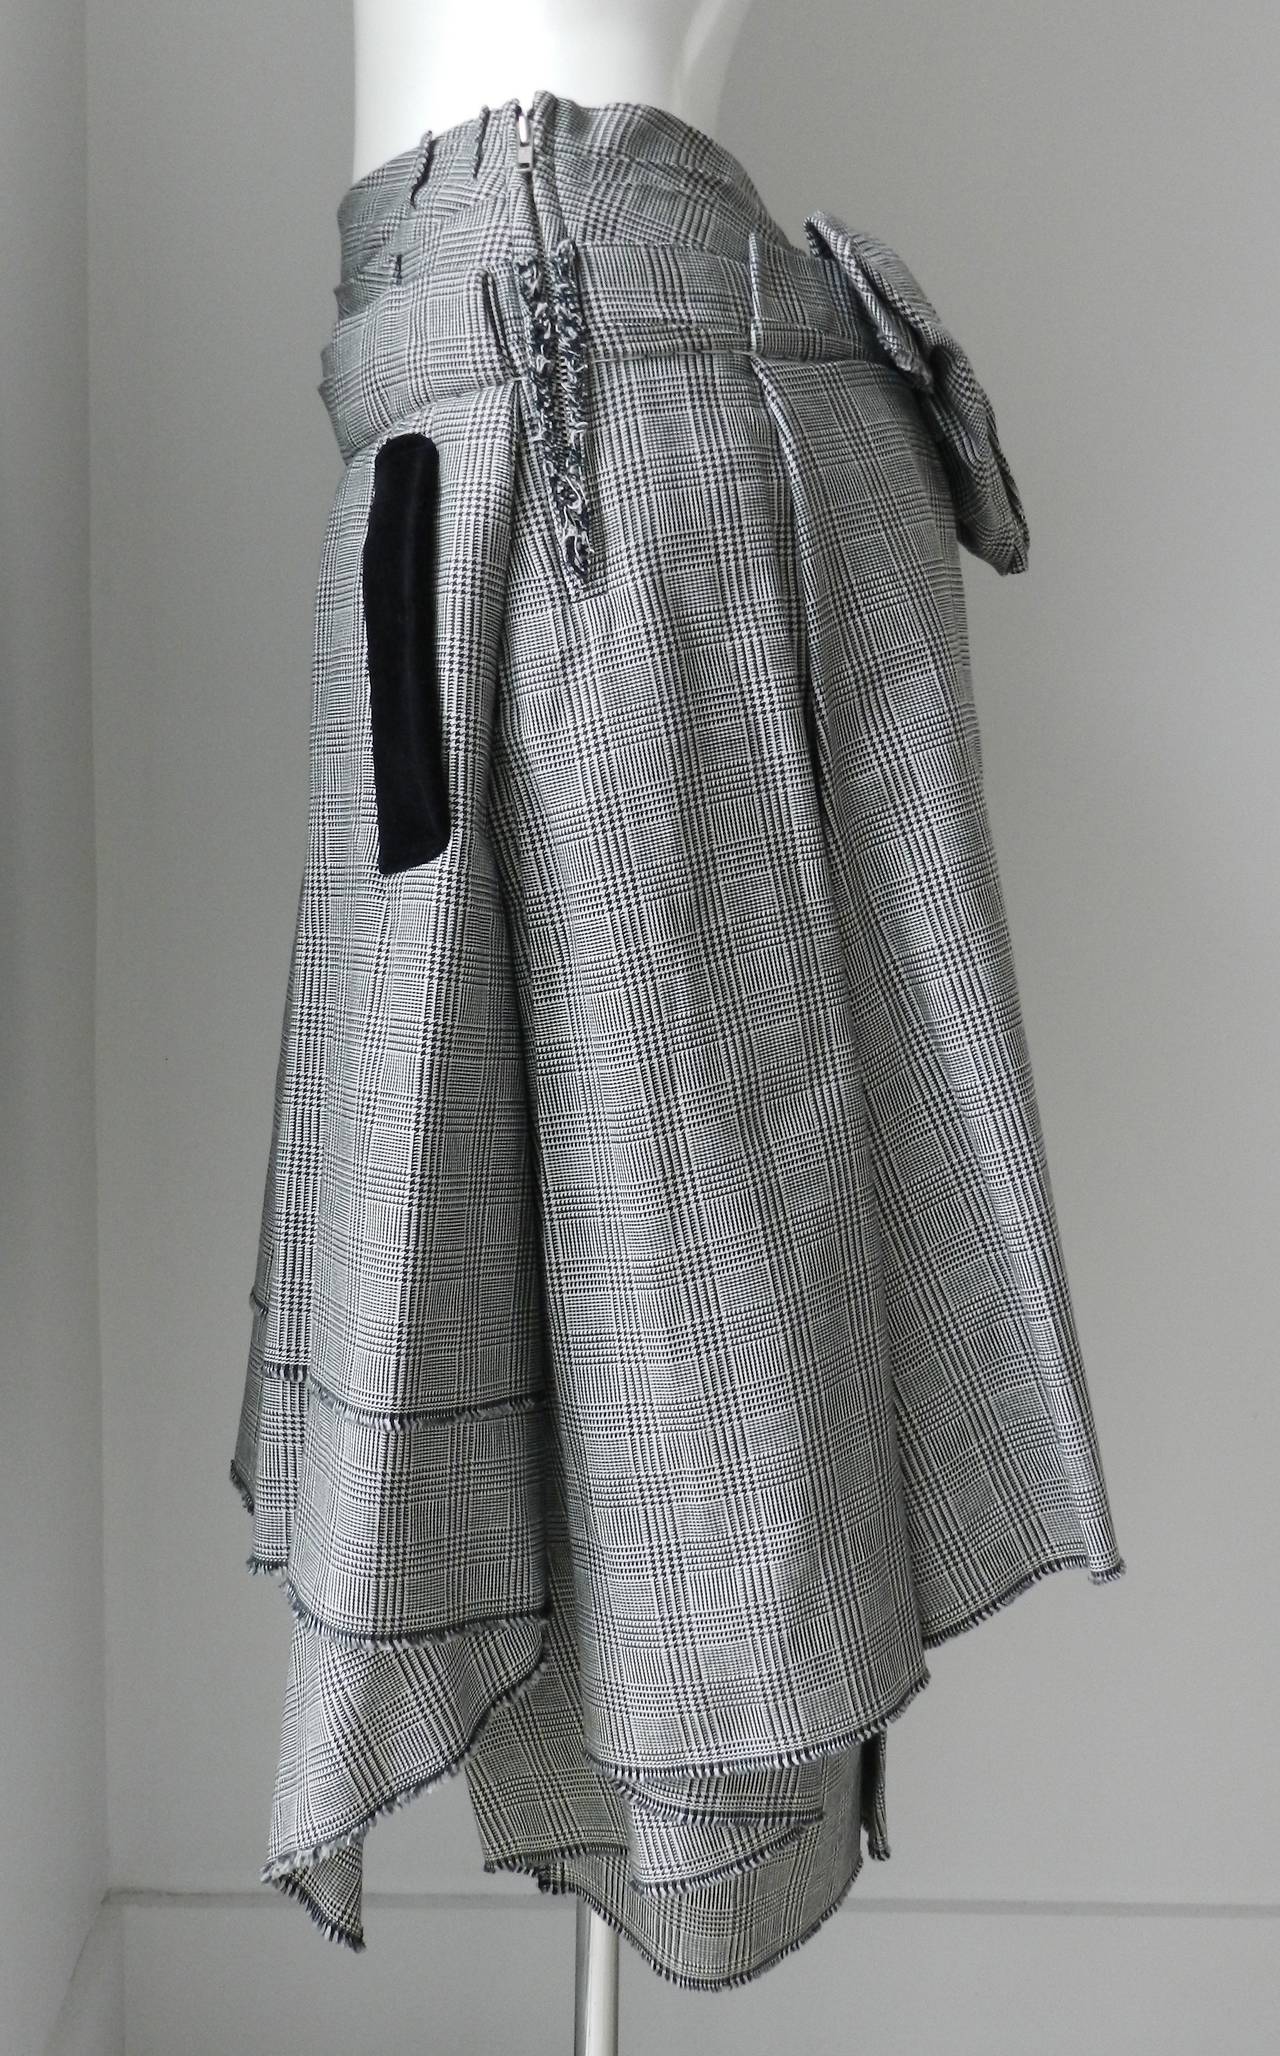 Comme des Garcons houndstooth asymmetrical skirt. Metal side zipper, black velvet pockets, pleated design. Excellent condition. Tagged size Small. Best fit for USA size 4/6. Waist is 28